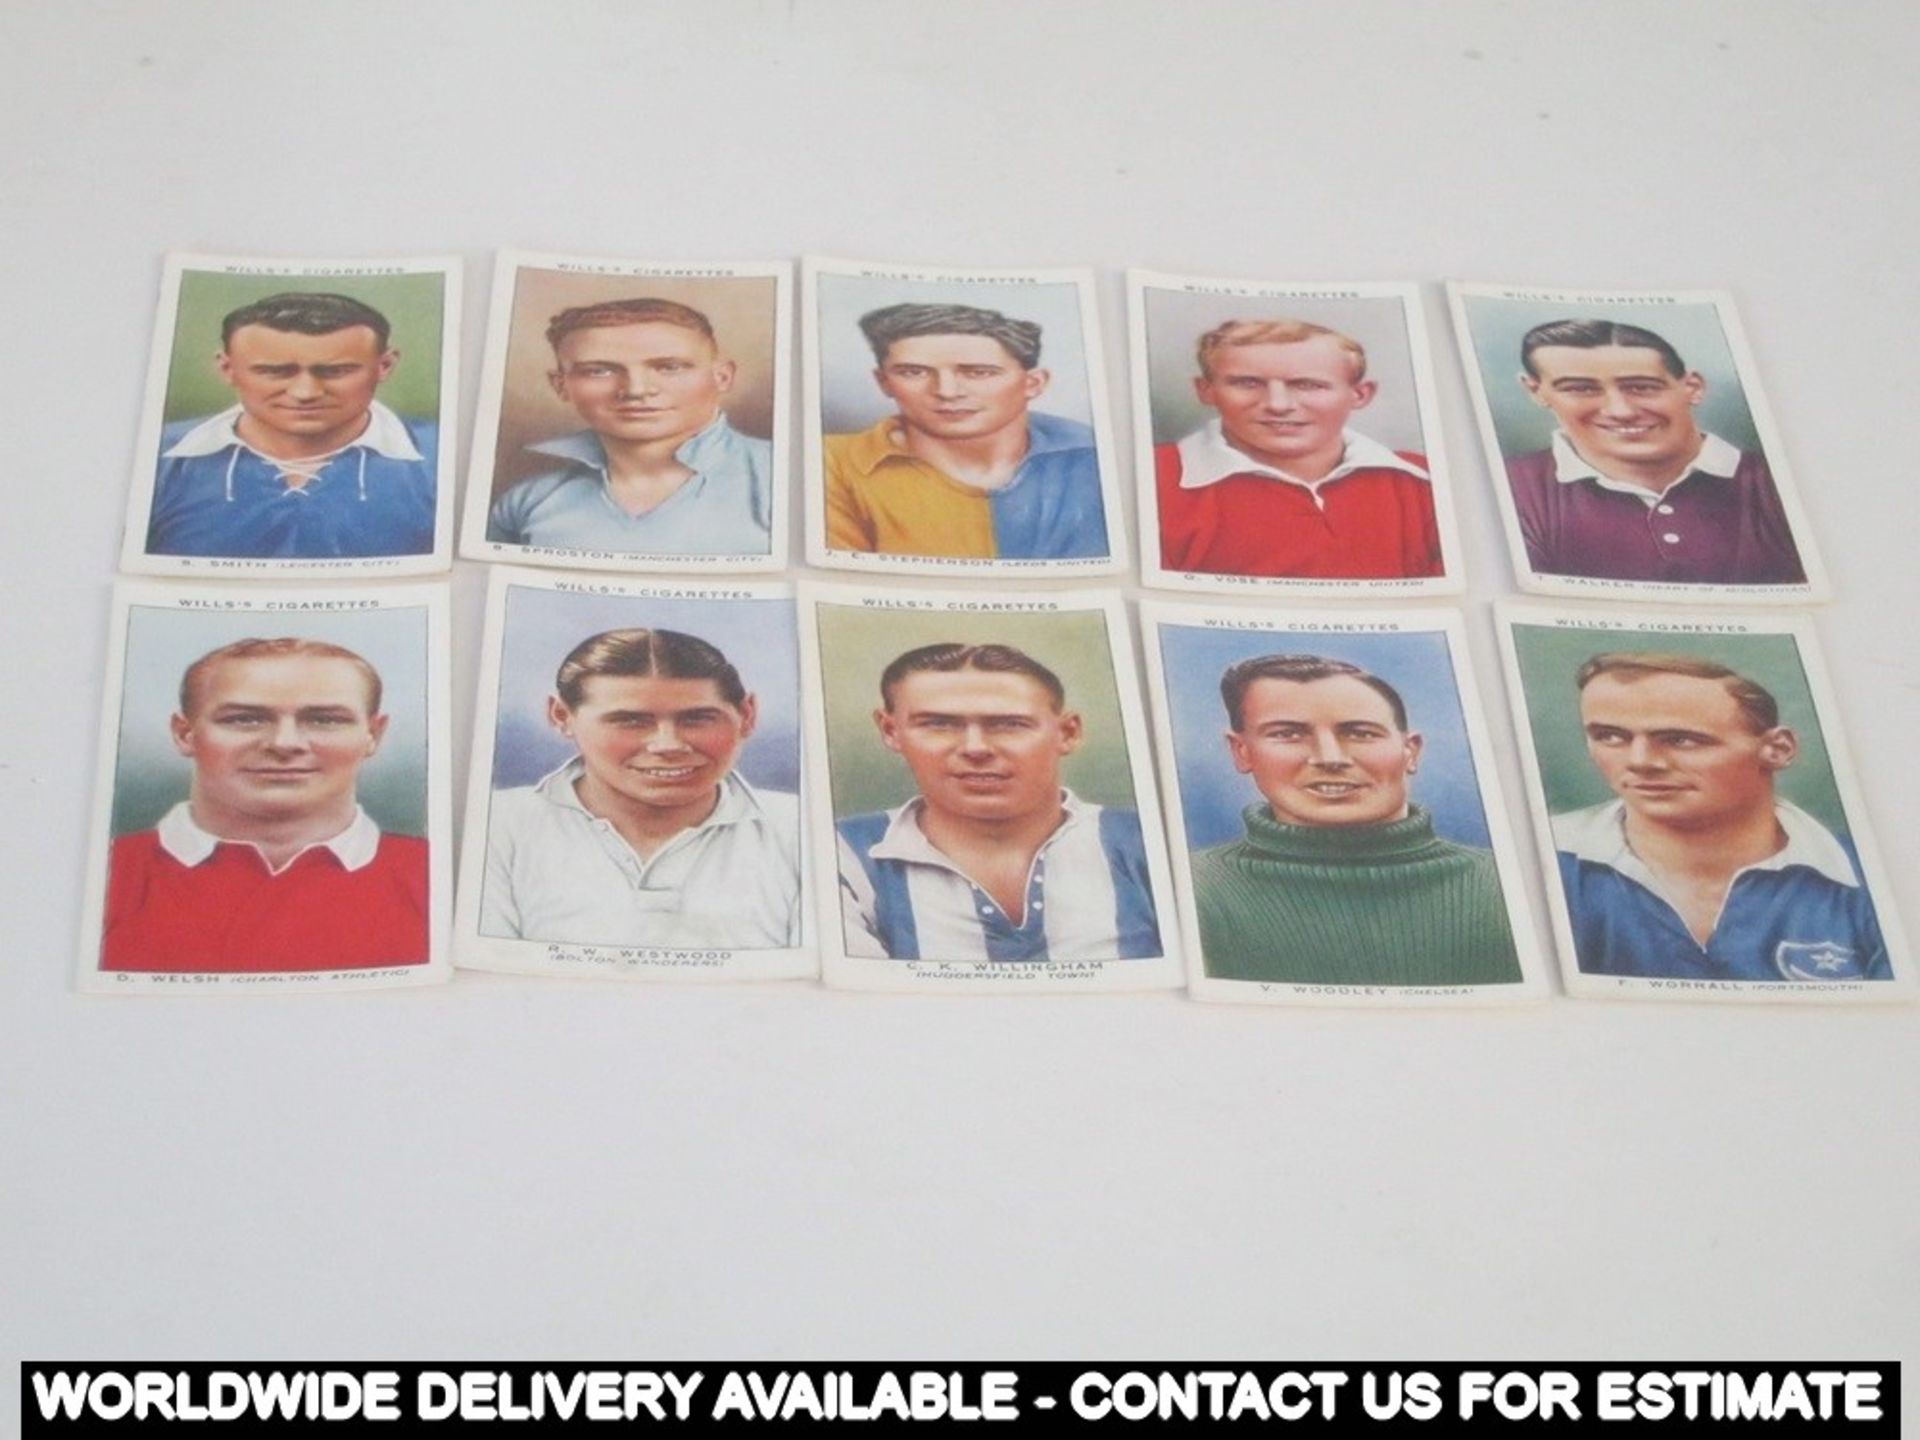 Box of 50 cigarette cards - Wild Woodbines - W D & H O Wills - Association Footballers - Image 8 of 9